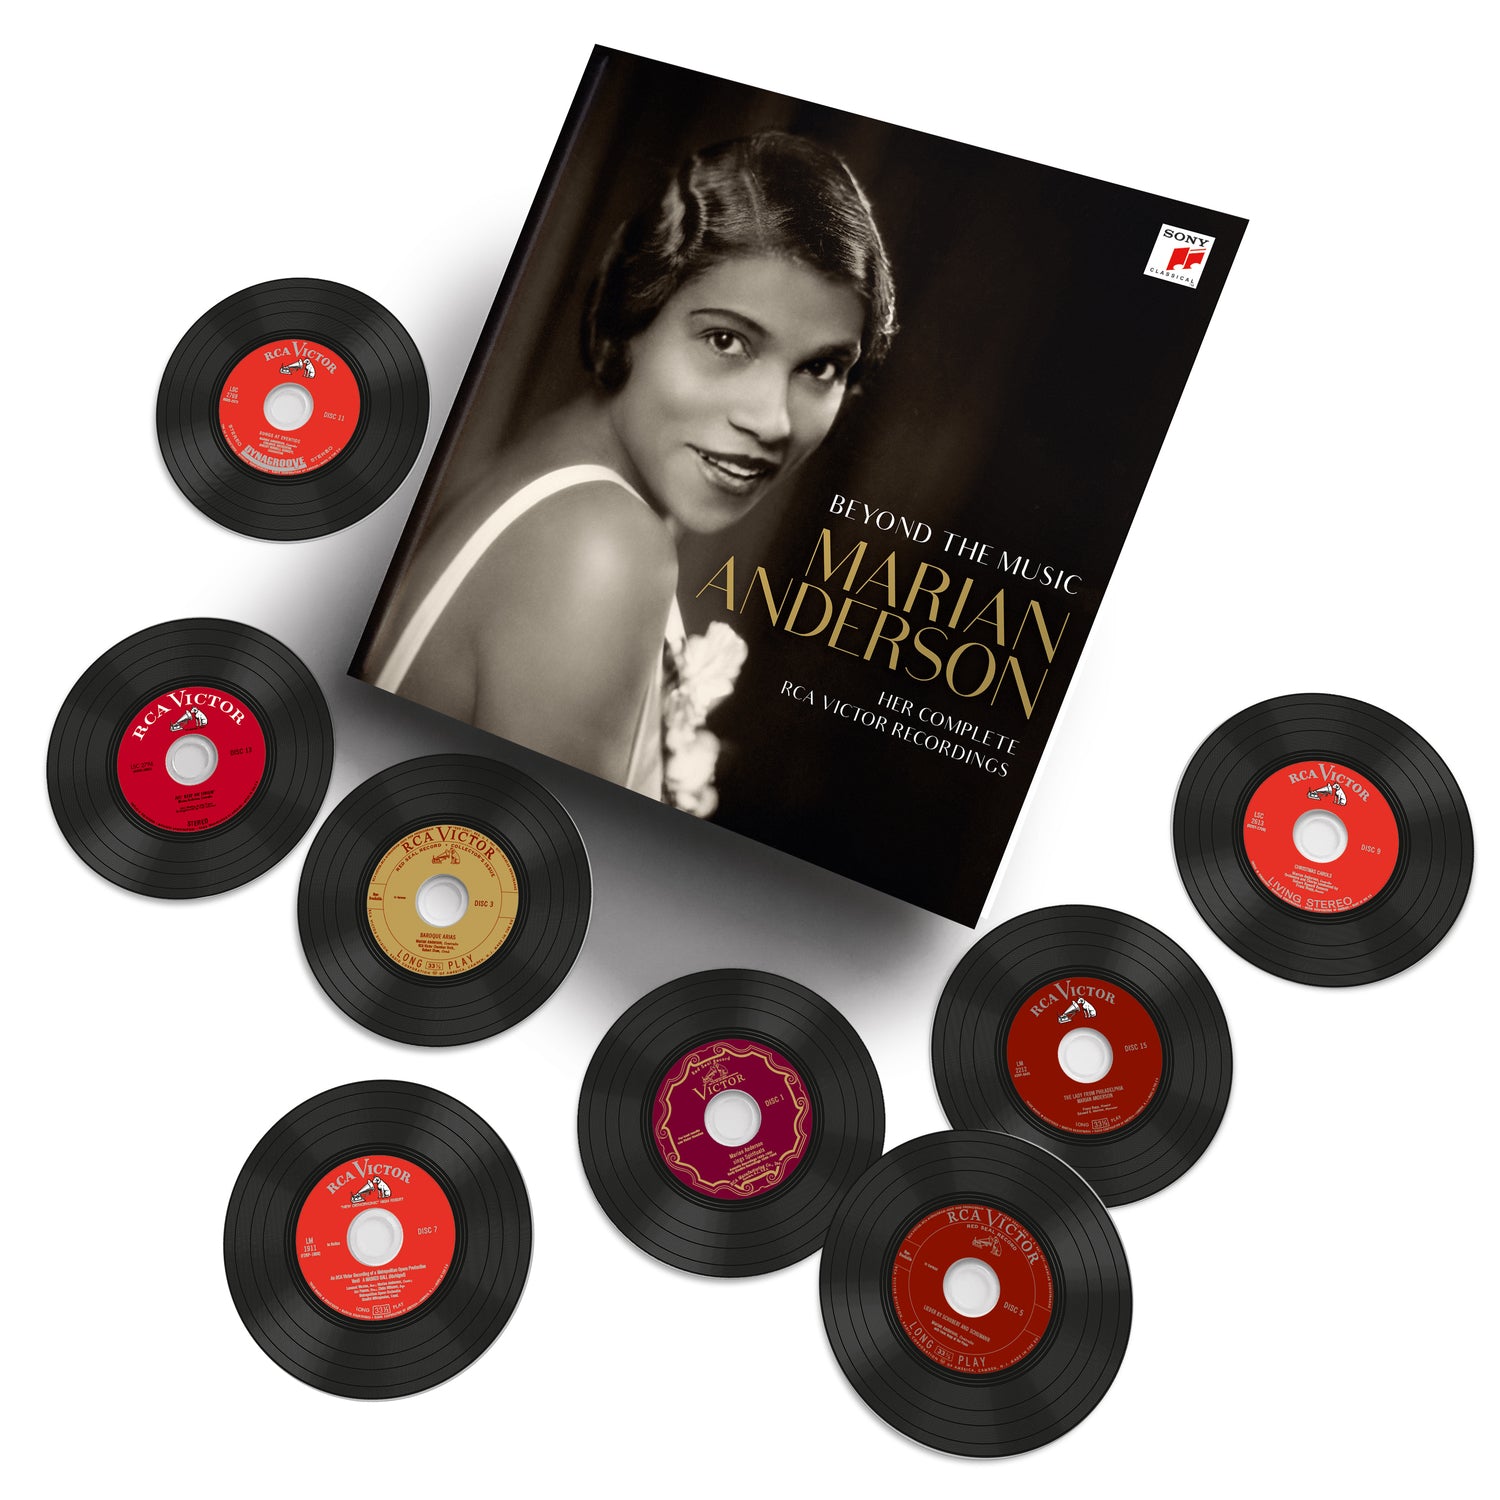 Marian Anderson: Beyond the Music [CD + Book]